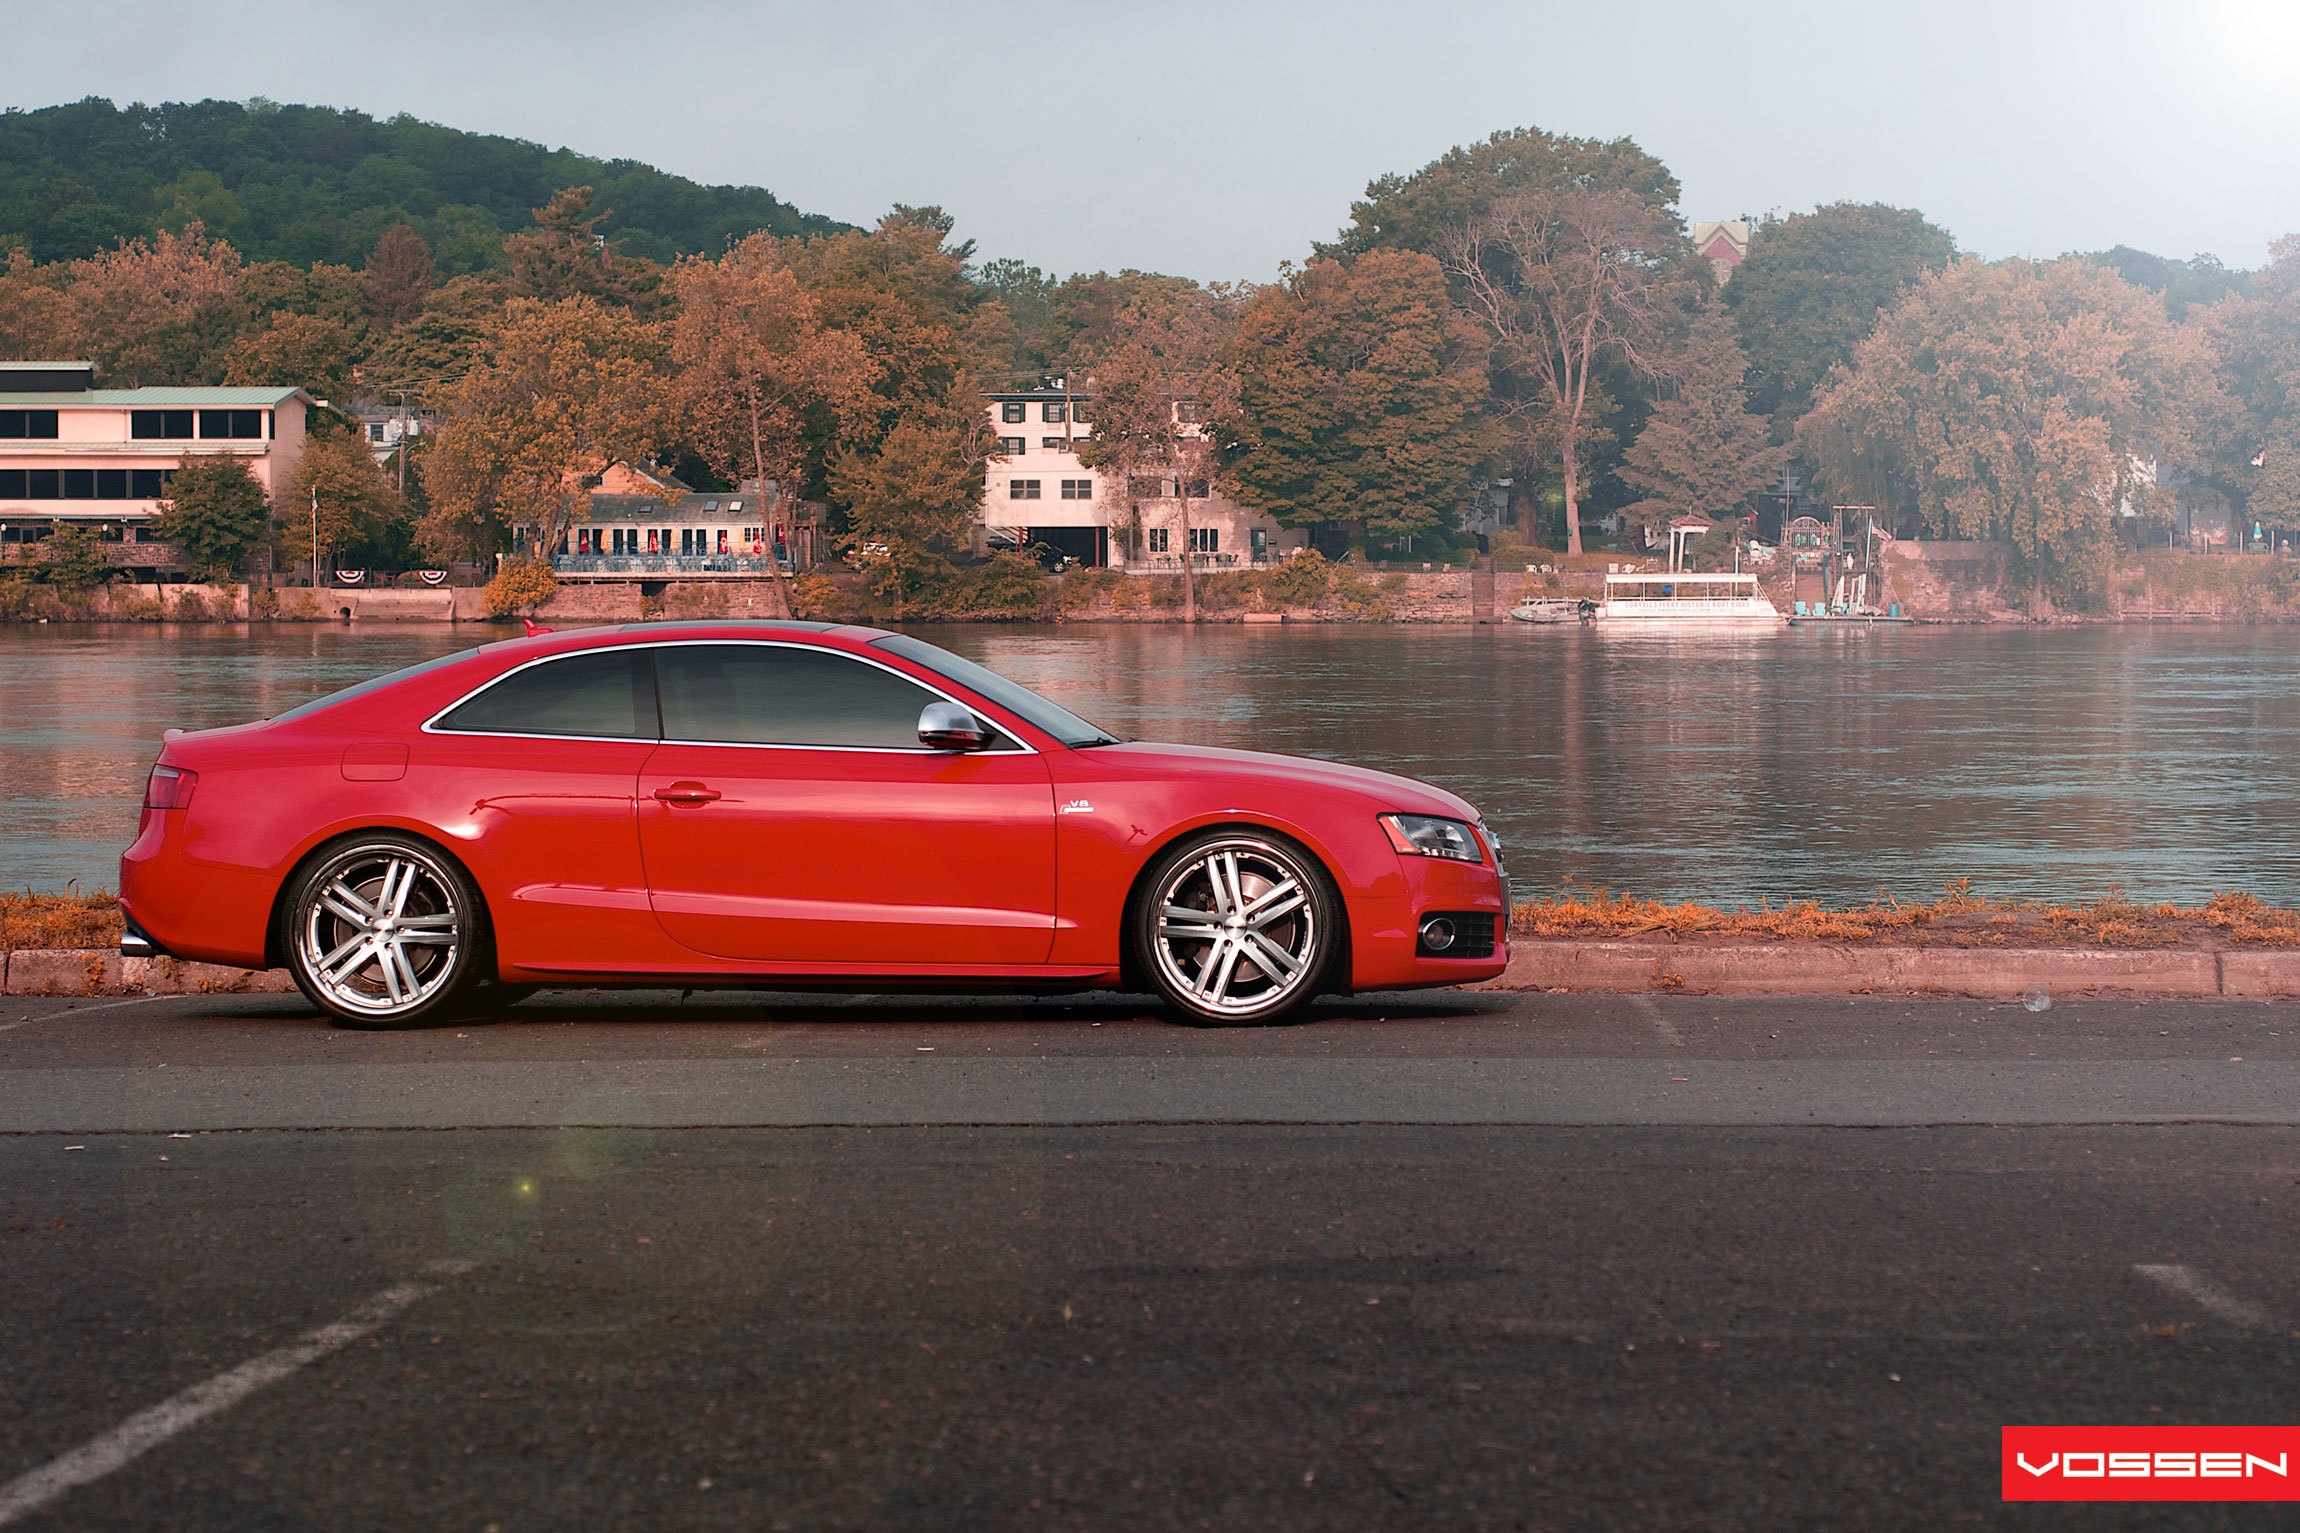 Red Audi A5 V8 with Vossen Wheels - Photo by Vossen